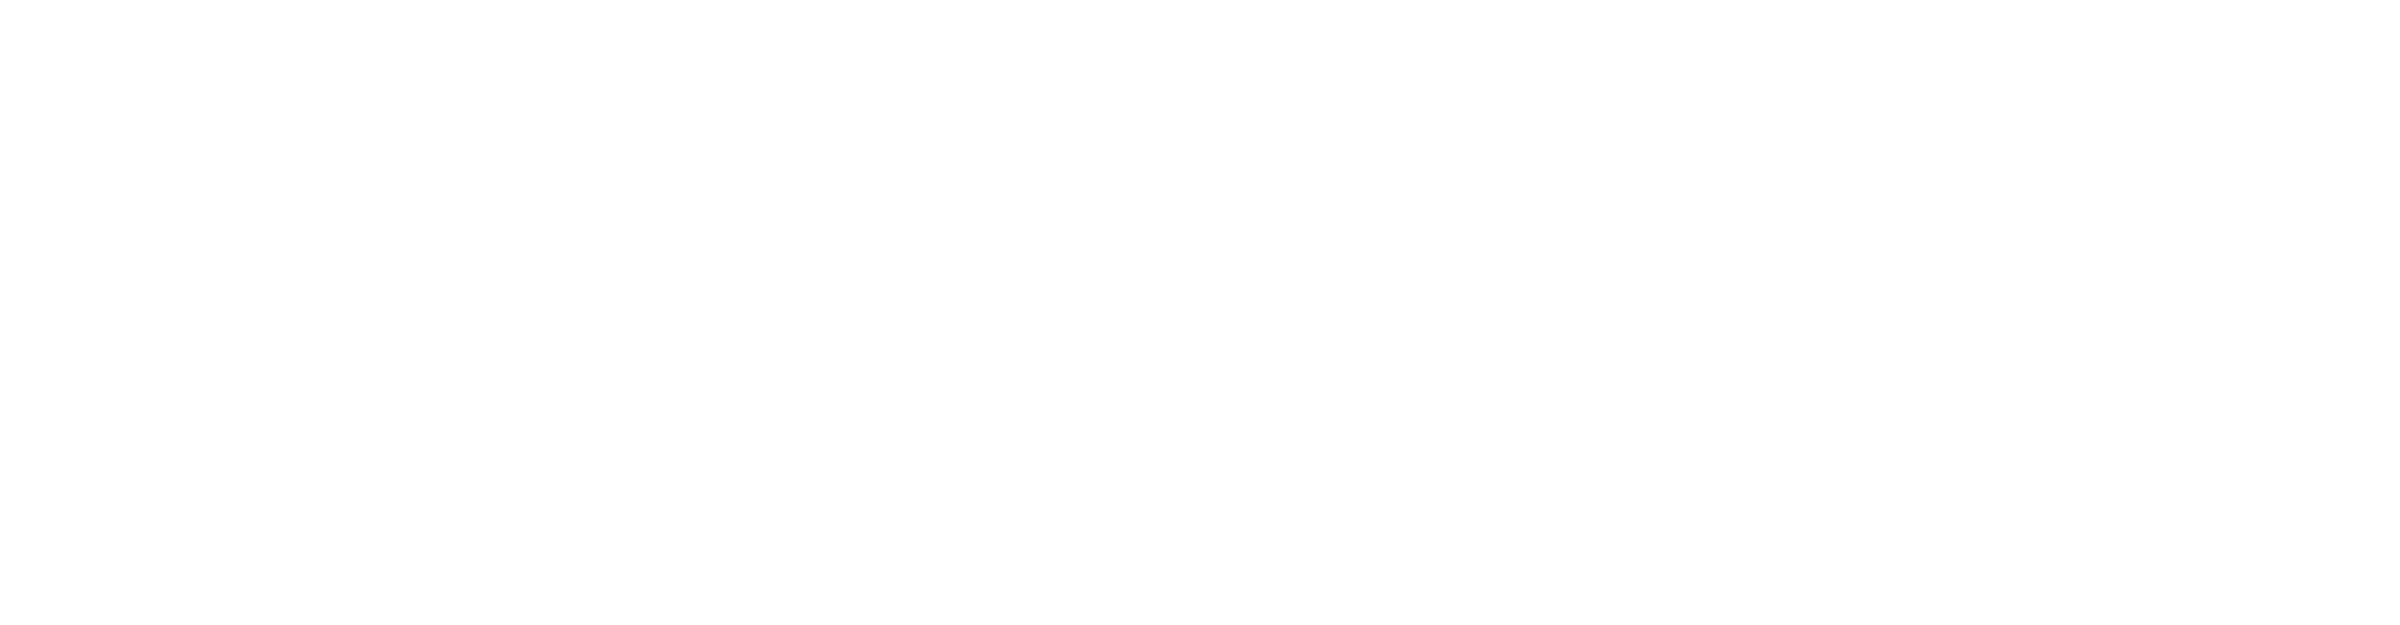 Chastain Plumbing, Heating and Cooling, LLC Logo